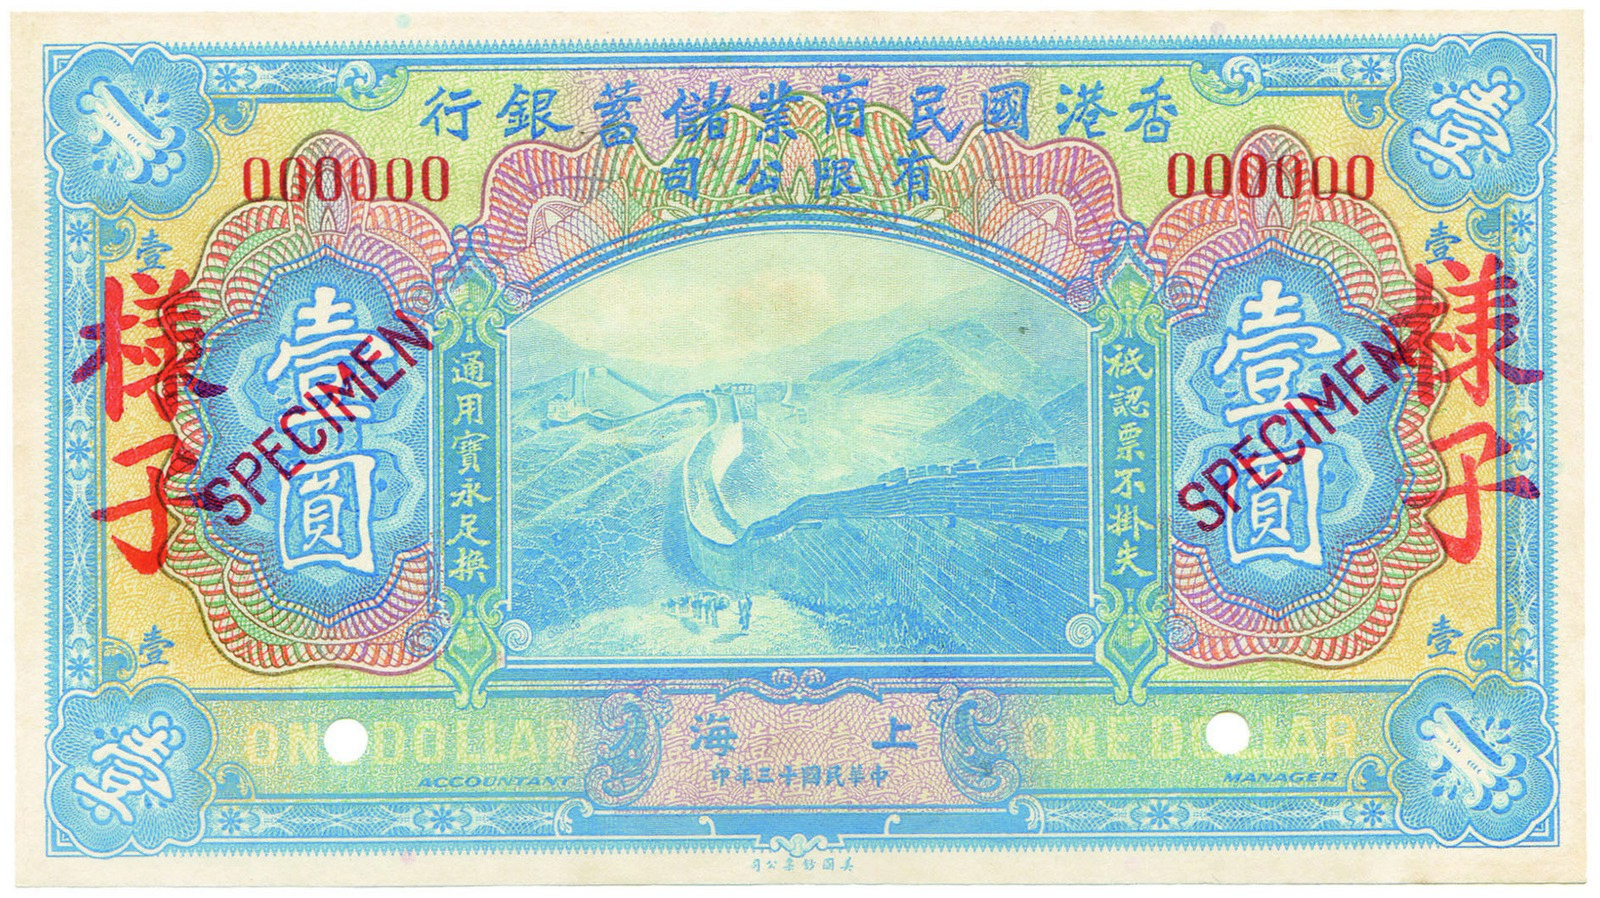 BANKNOTES, 紙鈔, CHINA - FOREIGN BANKS, 中國 - 外國銀行, National Commercial and Savings Bank 香港國民商業儲蓄銀行: